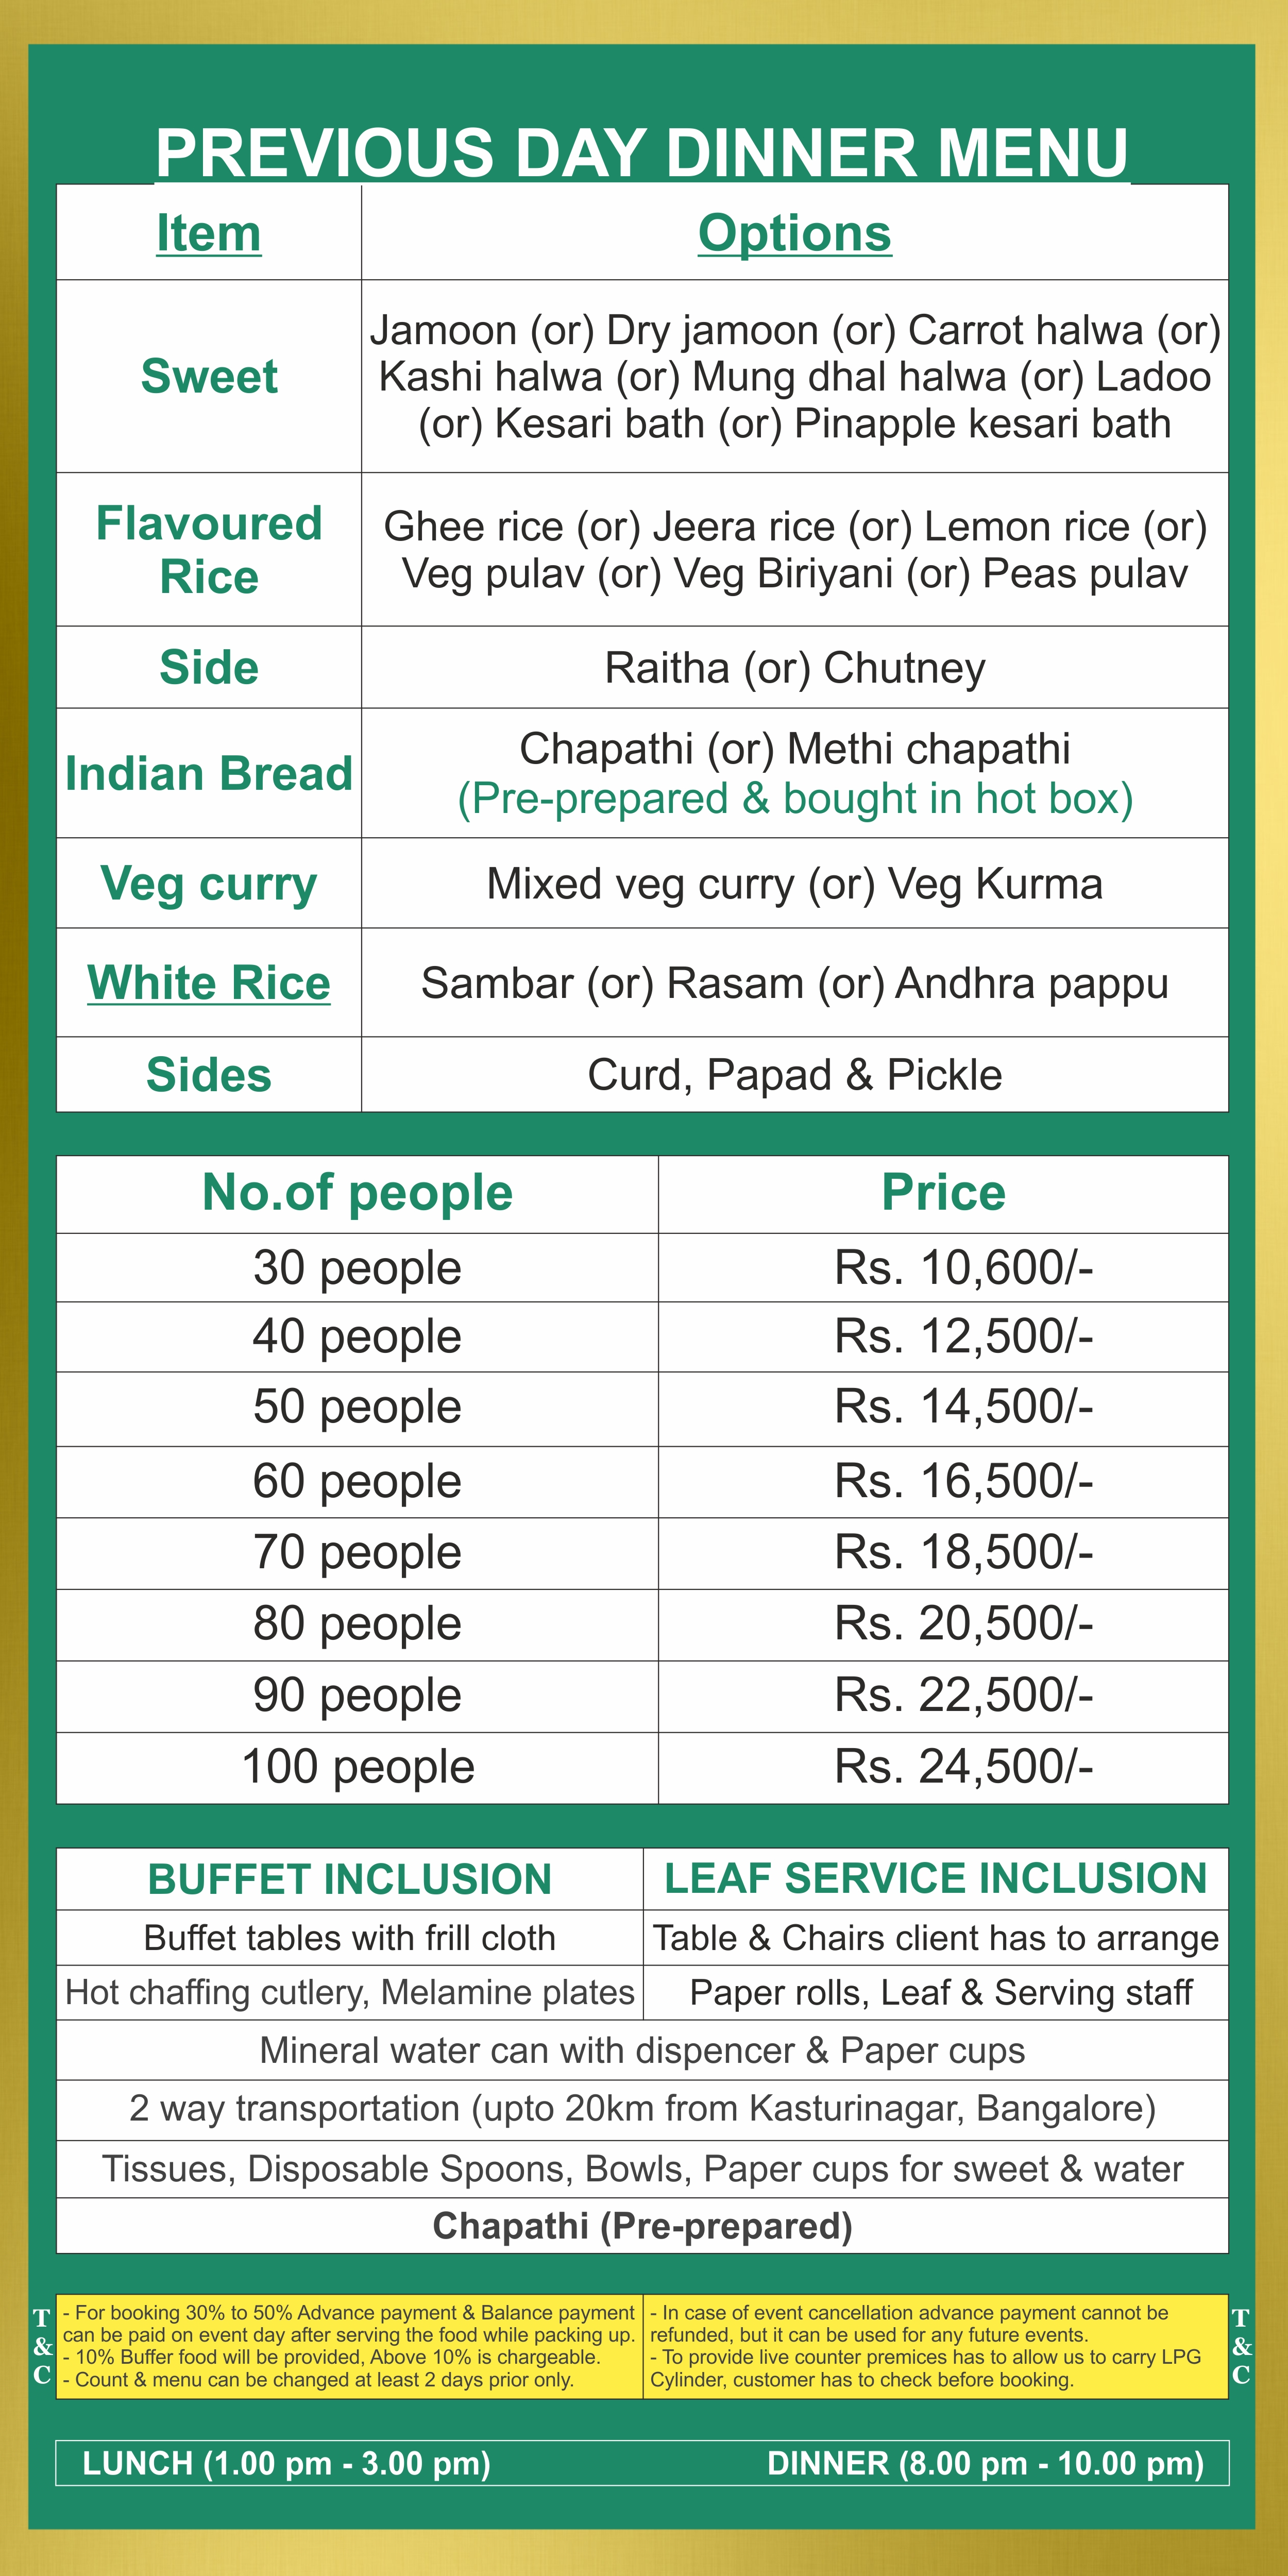 Previous Day Dinner catering Menu price list in Bangalore